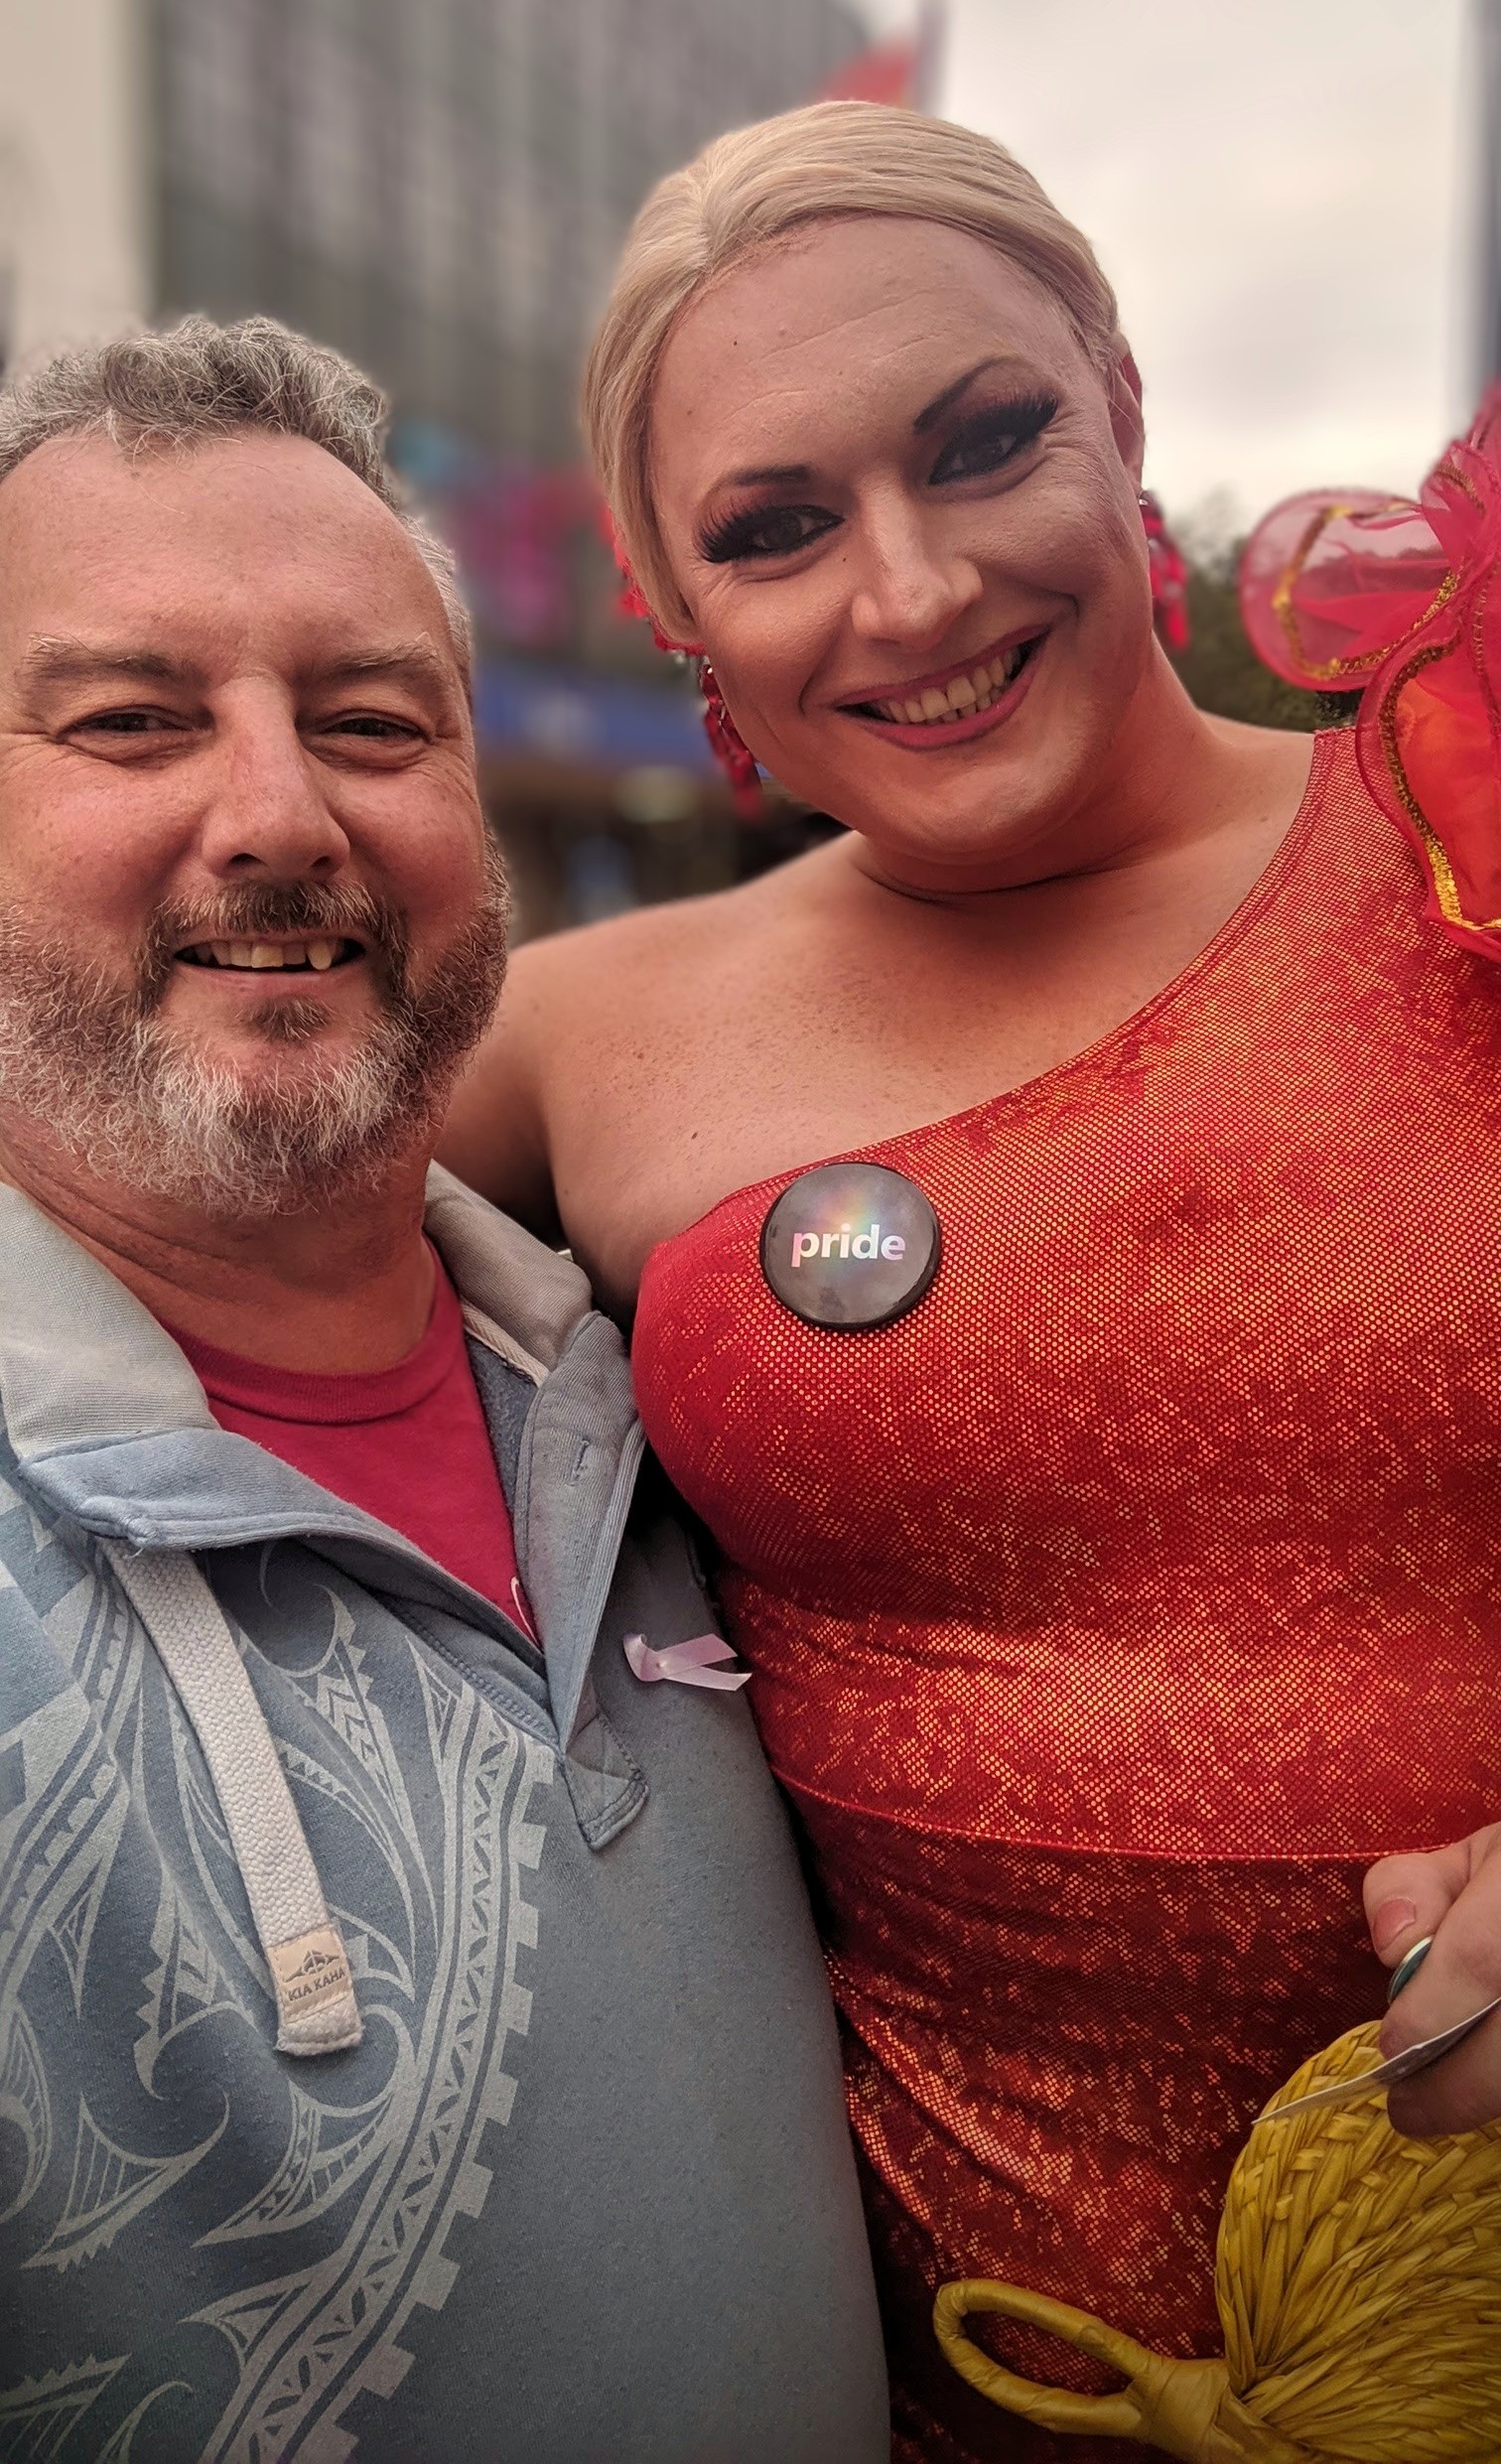 Mike and unknown person at Pride March 2019